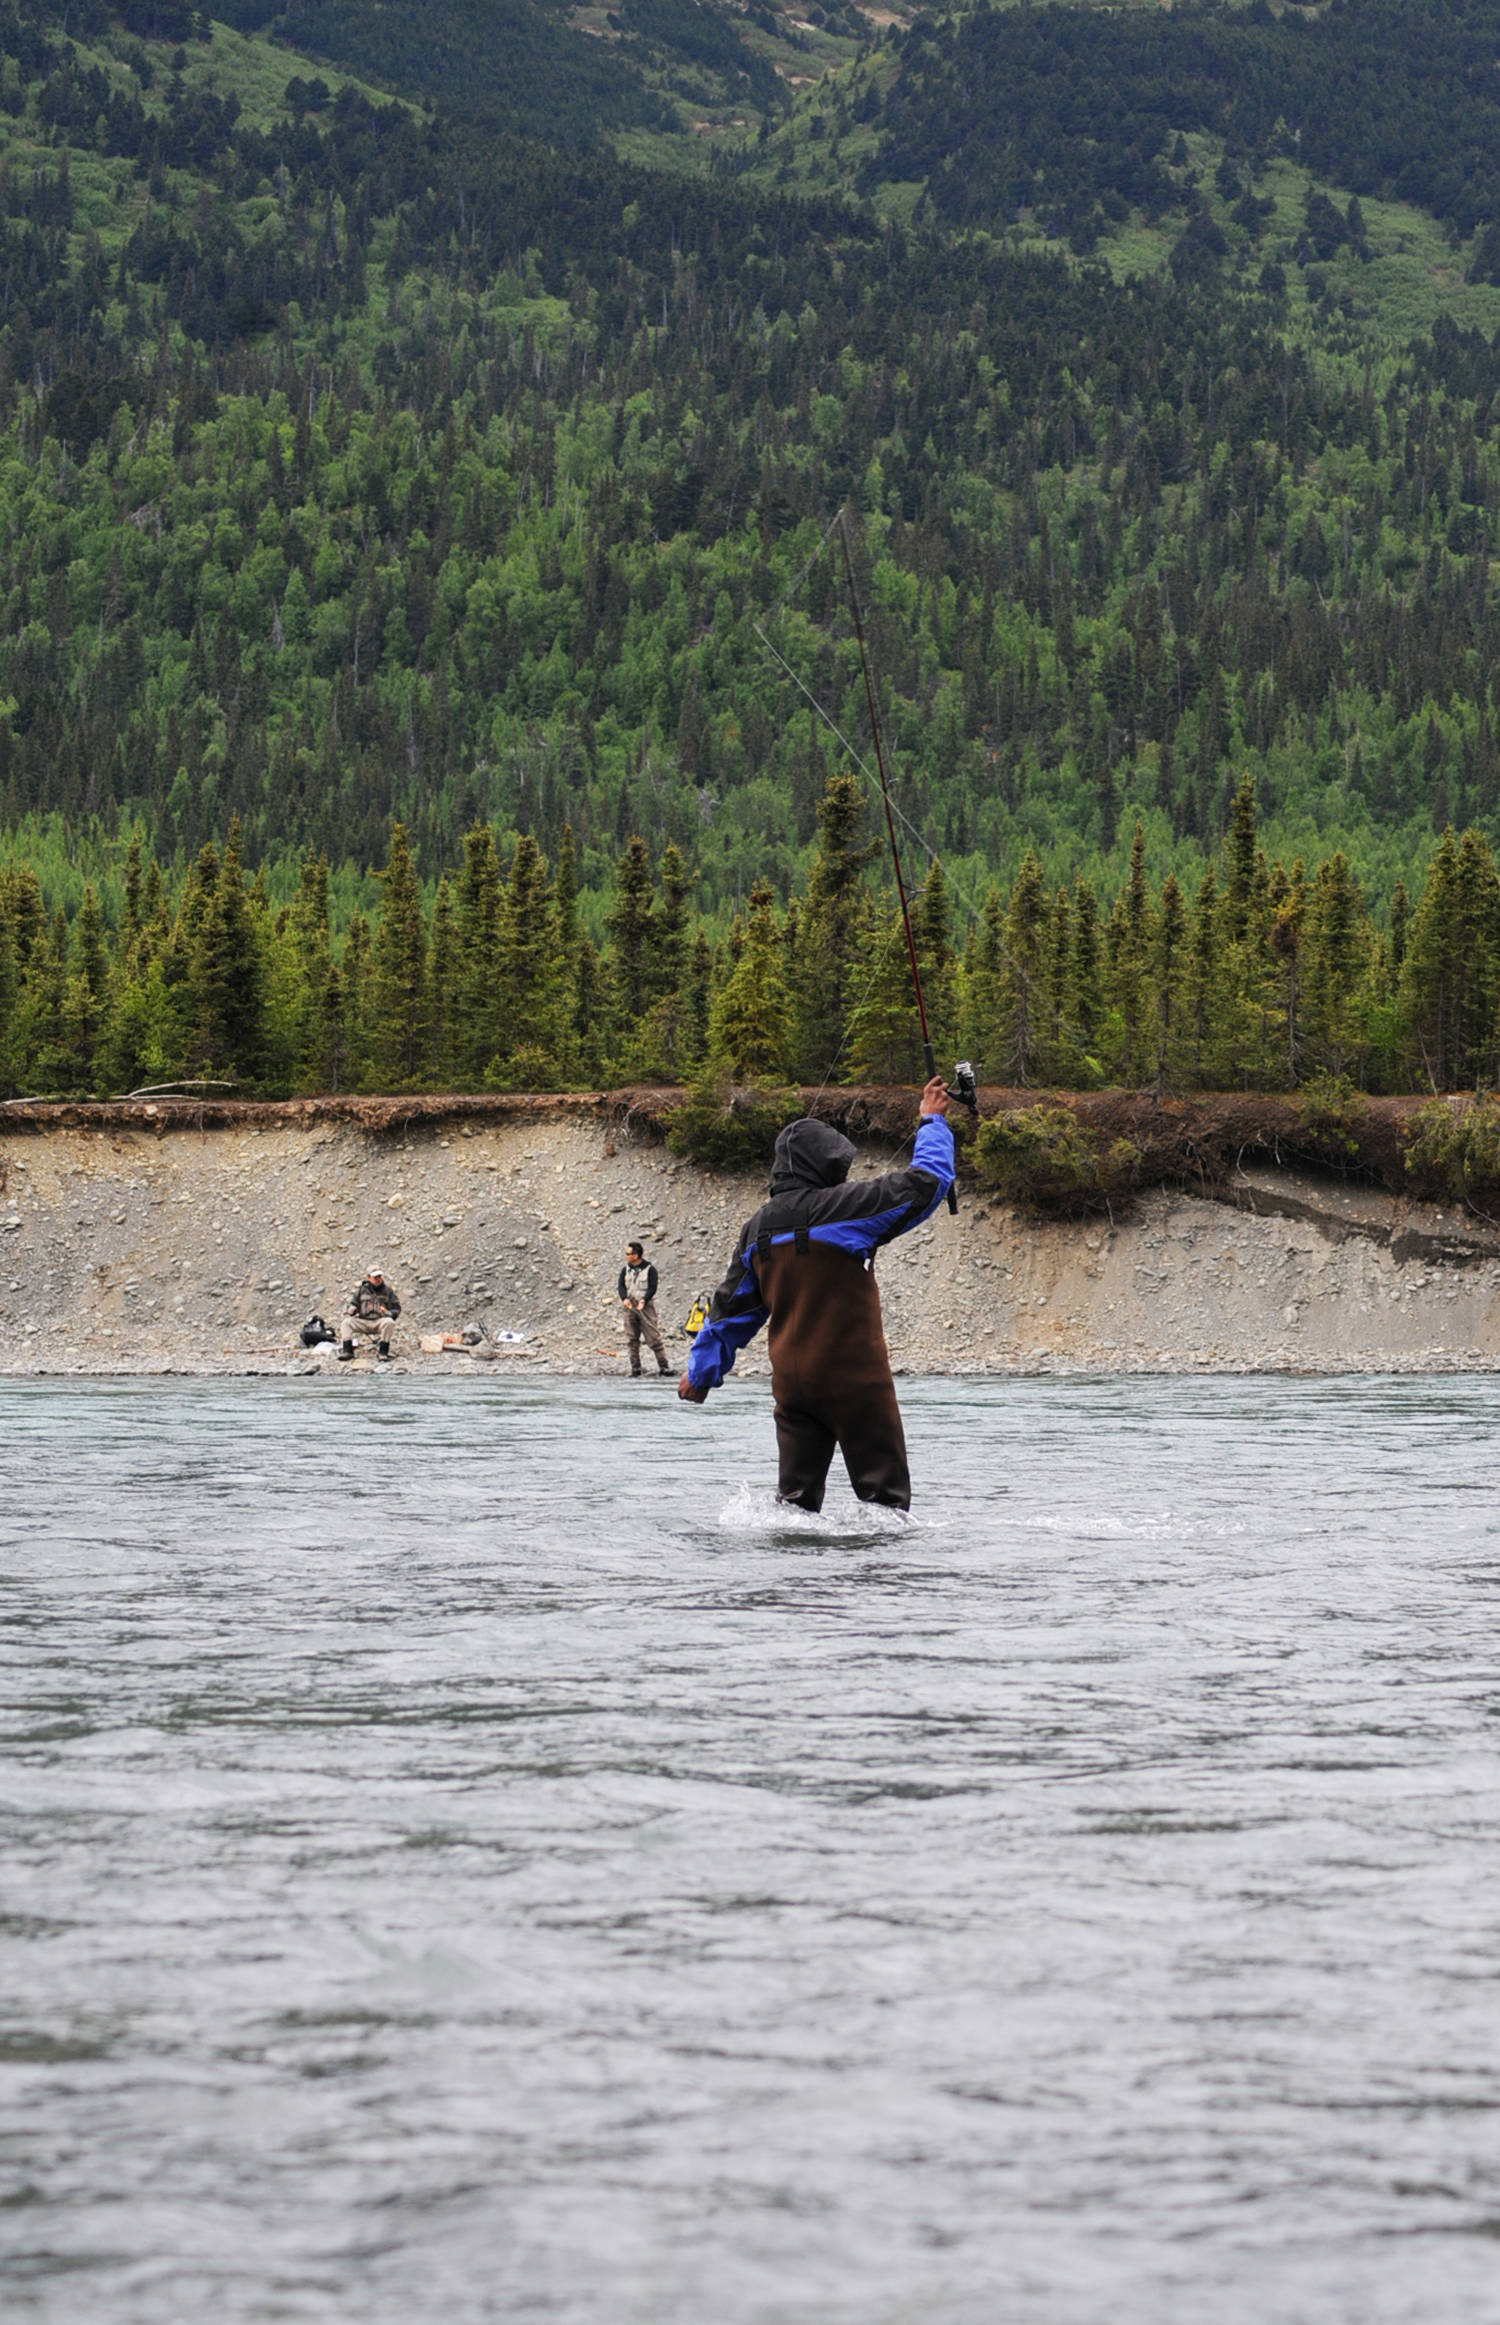 A flyfisherman casts for ockeye salmon on the bank of the Kenai River downstream of the confluence with the Russian River on Sunday, June 11, 2017 near Cooper Landing, Alaska. Sunday was the first opening for the popular Russian River sockeye salmon sportfishery, and by midmorning, many anglers were already packing out their limits of salmon while others pulled in their catches. (Photo by Elizabeth Earl/Peninsula Clarion)